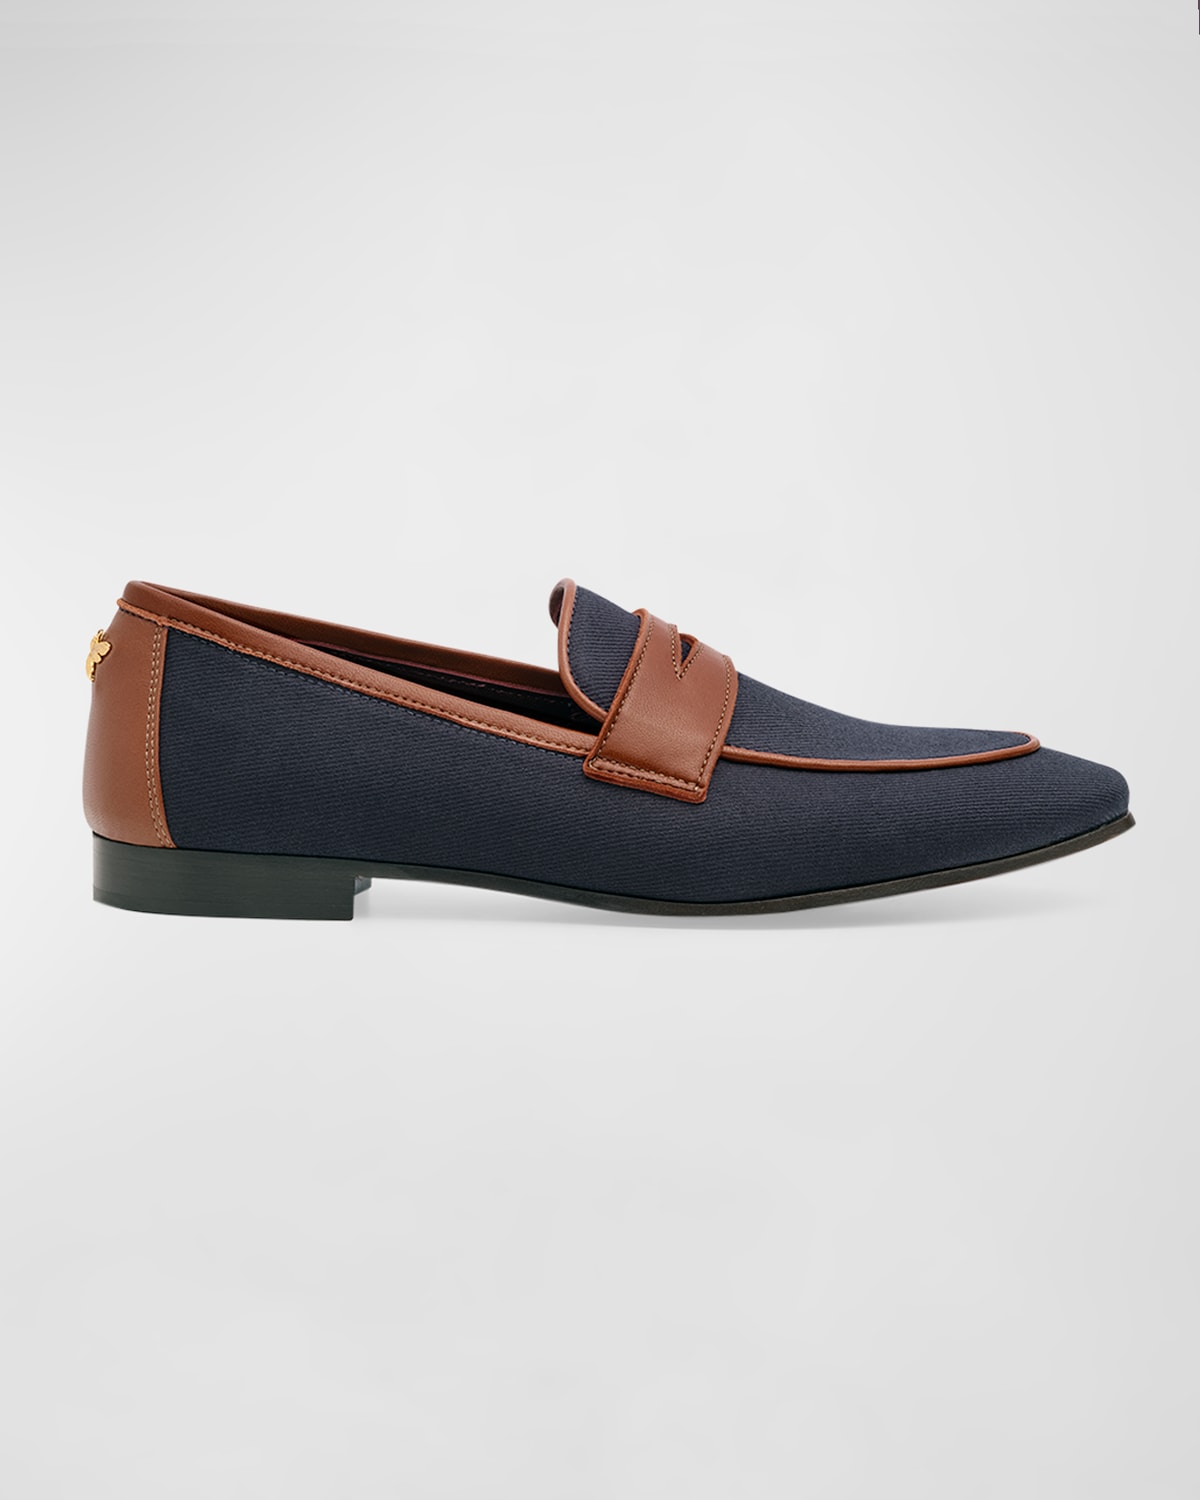 Bicolor Flat Penny Loafers